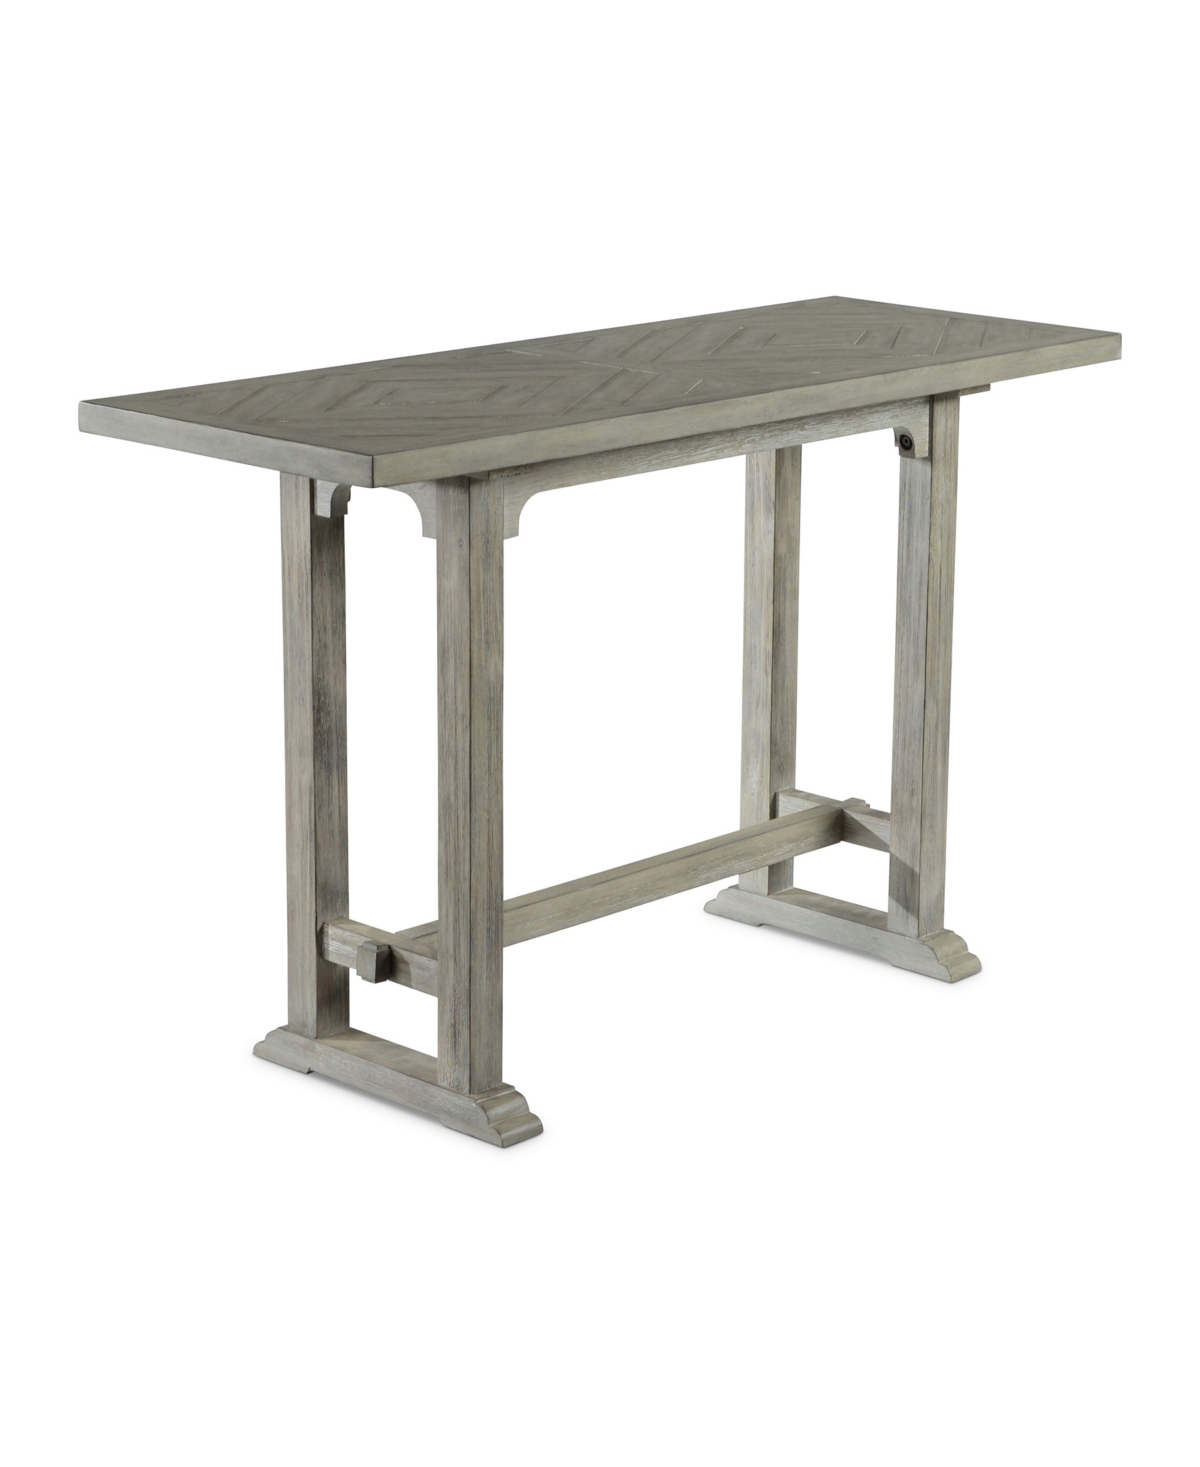 Steve Silver Whitford 48" Distressed Wood Sofa Table In Dove Gray Finish